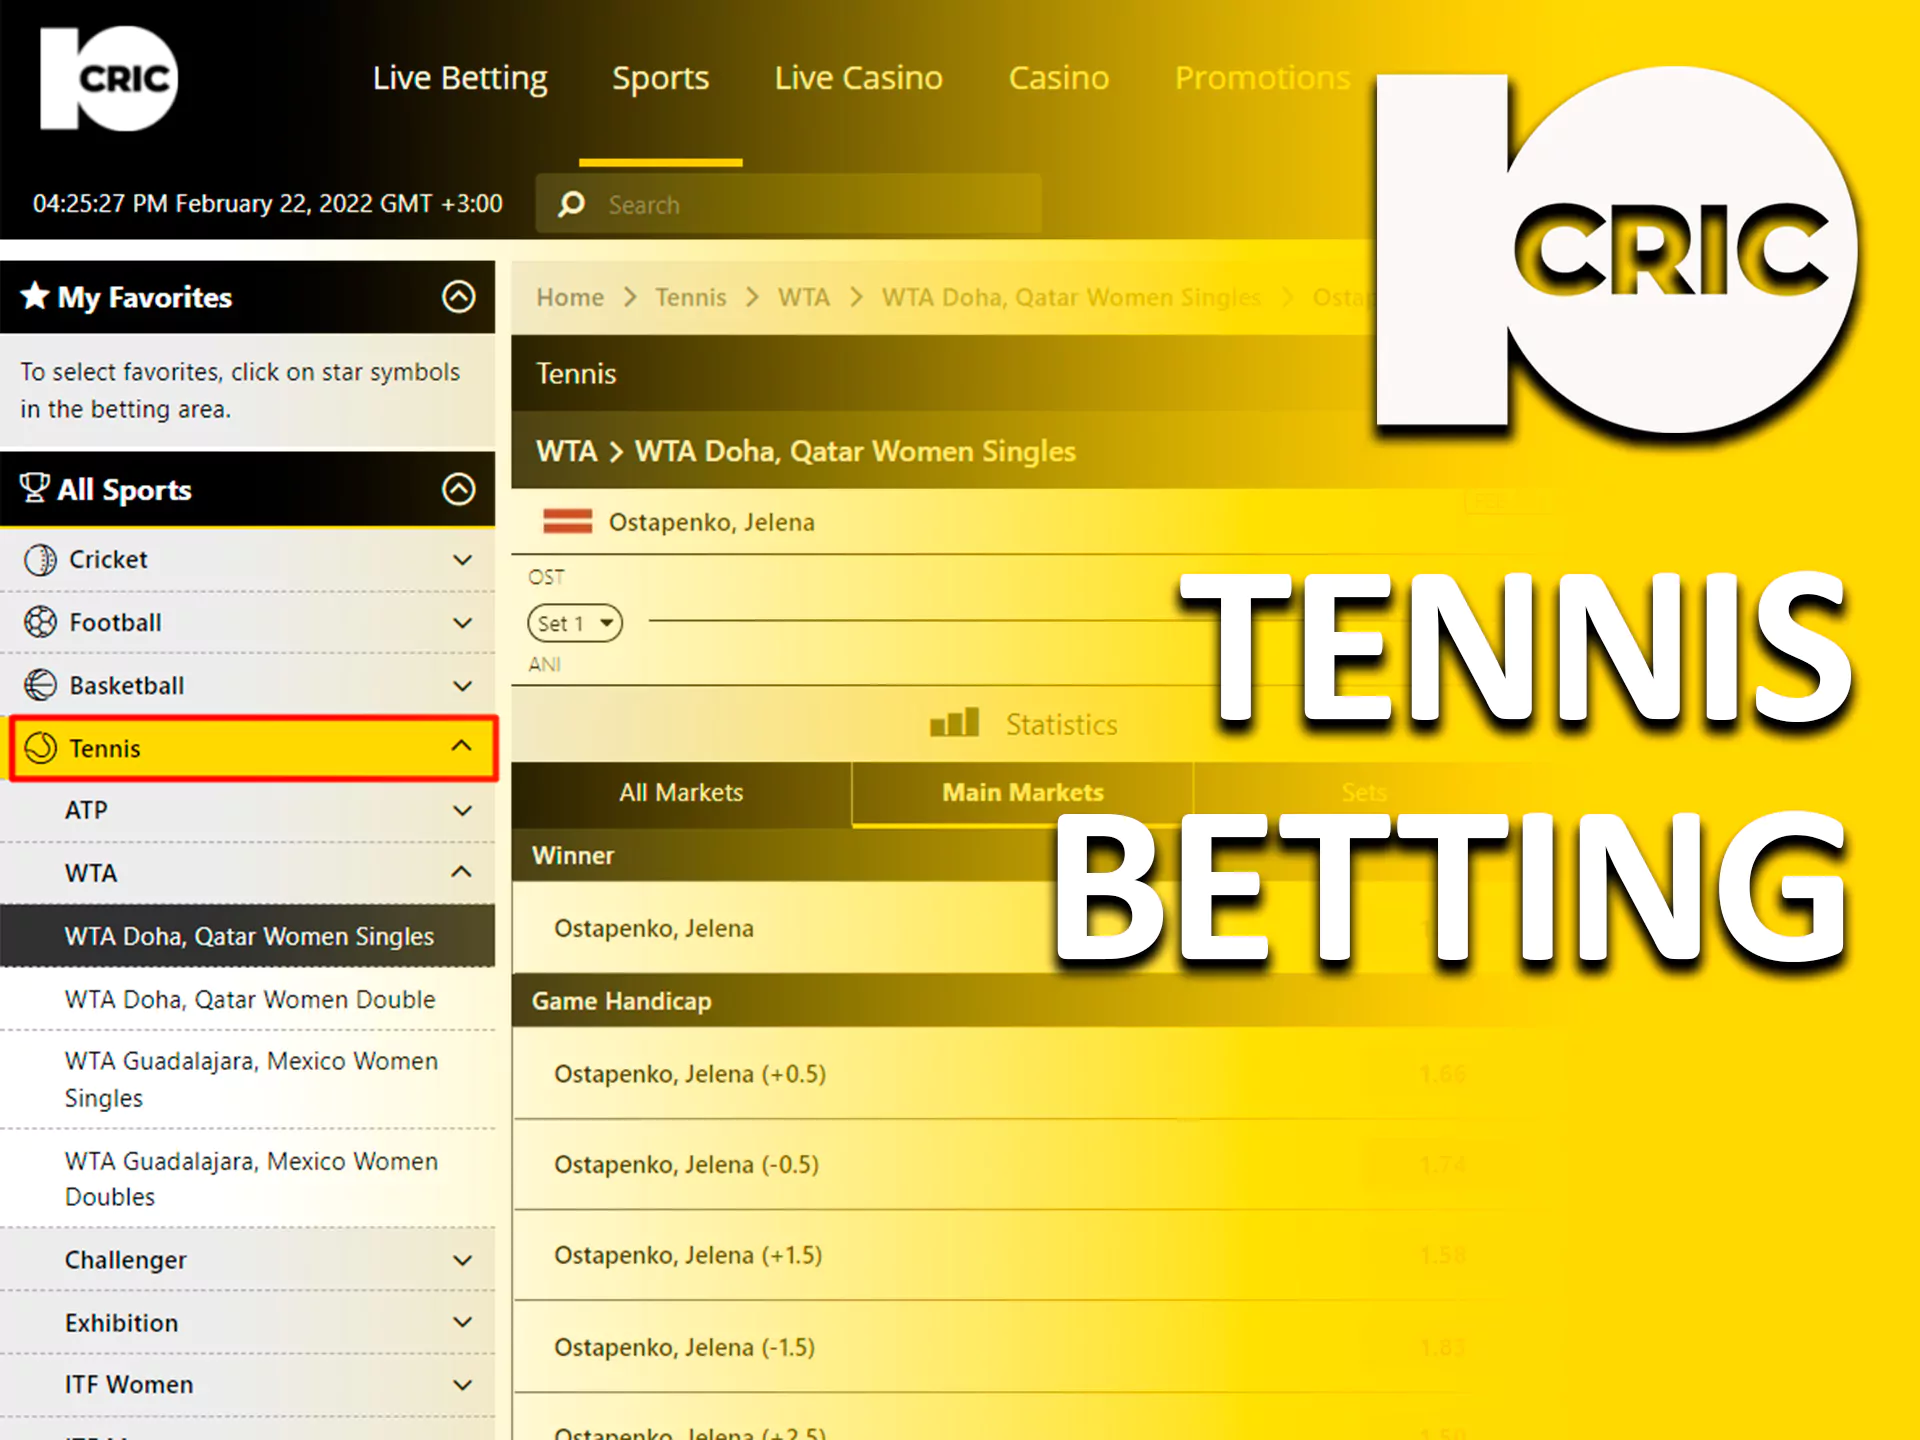 Tennis betting is also available on 10cric.